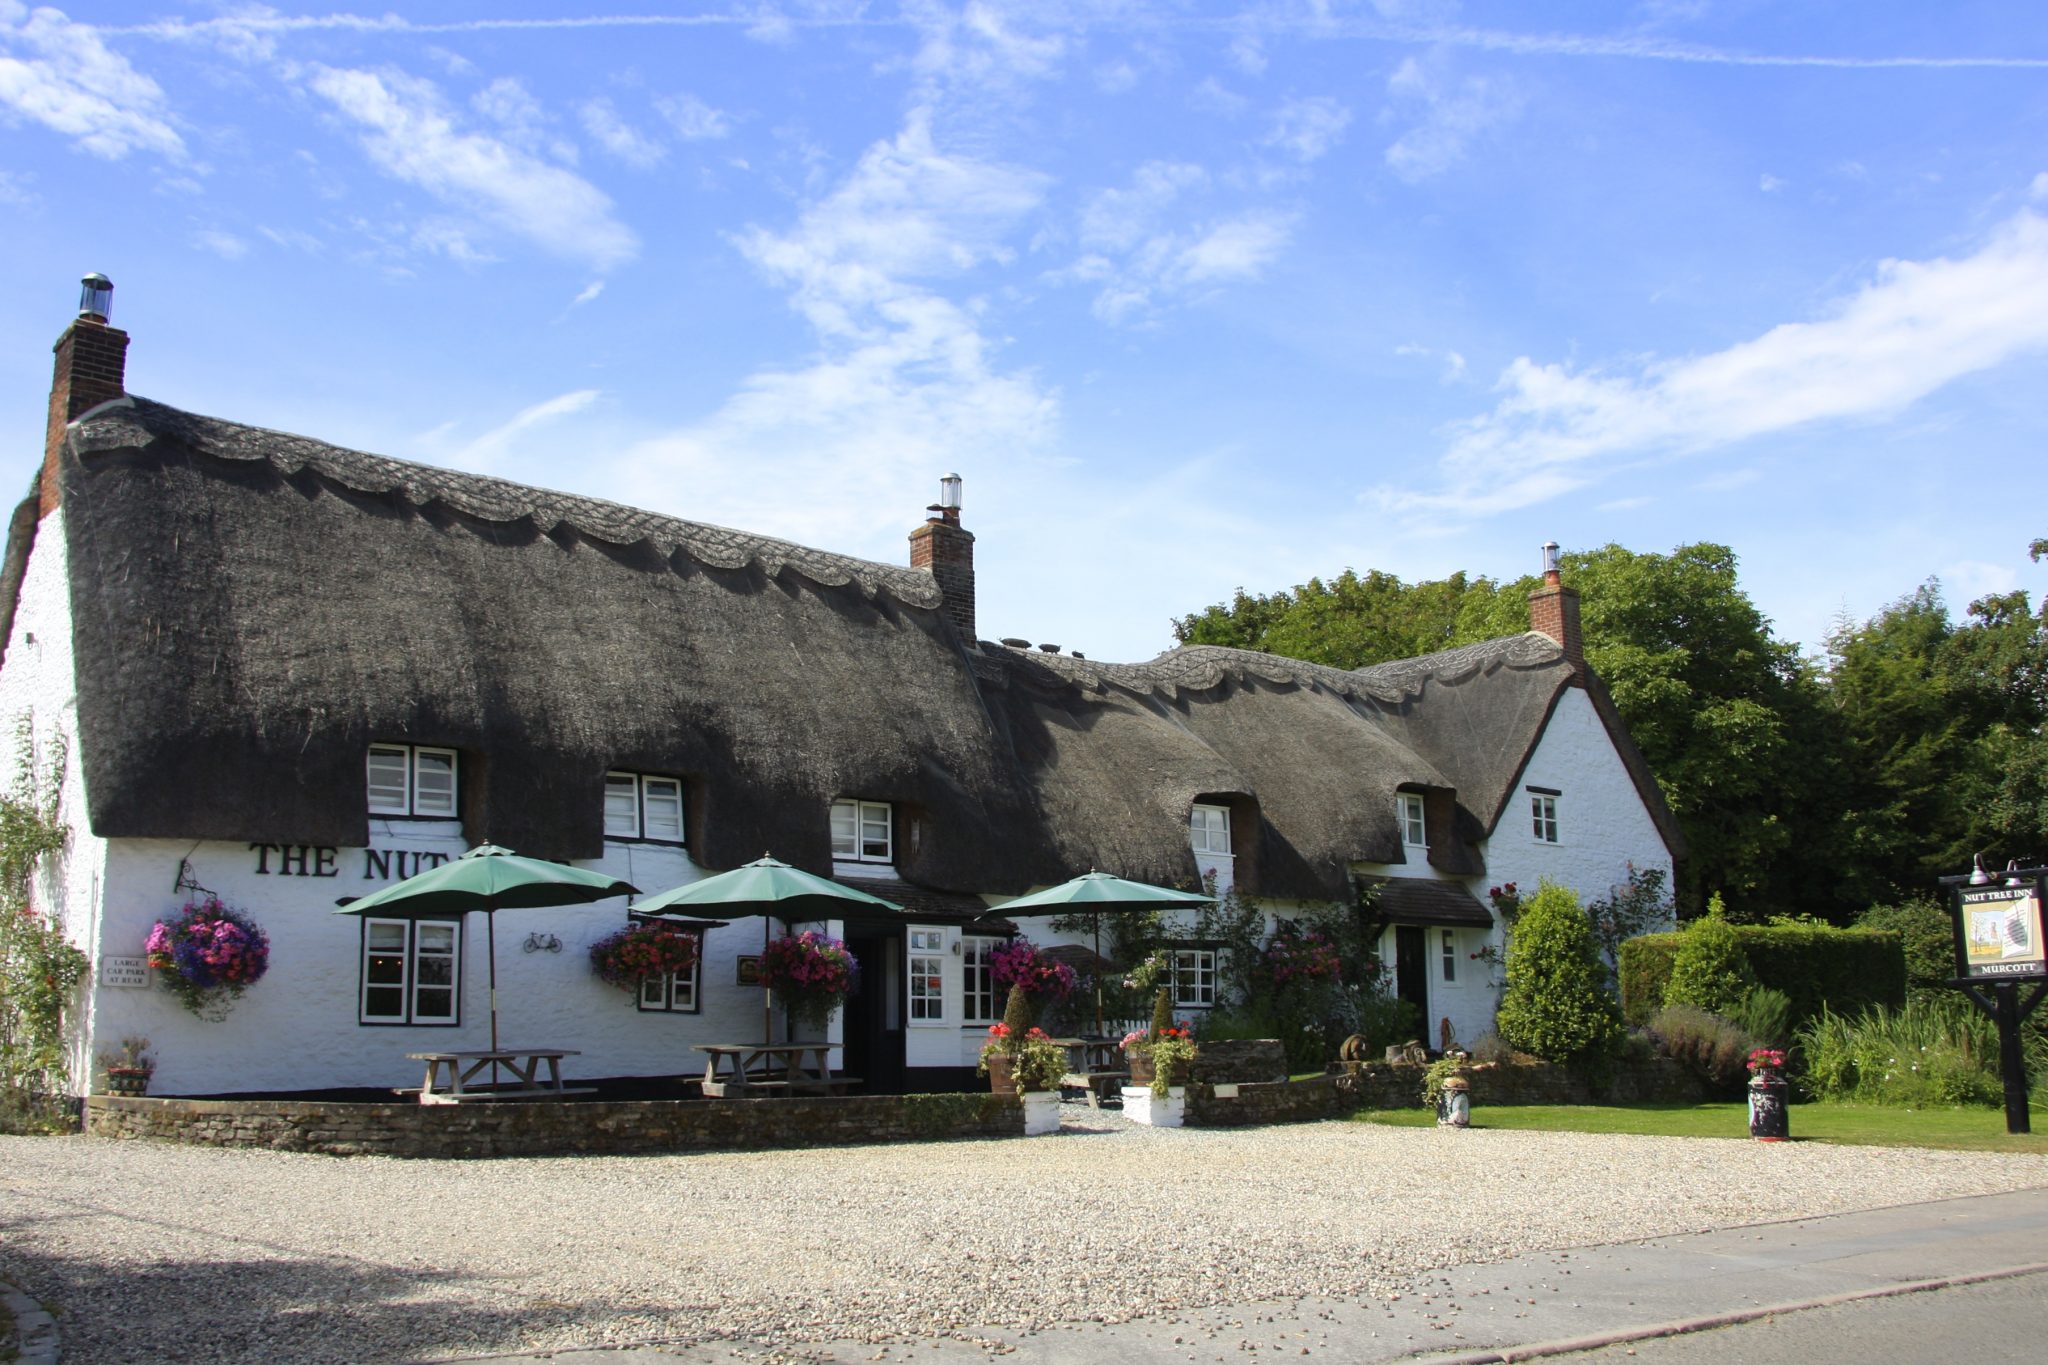 Last but not least Michelin Star pub in Oxfordshire